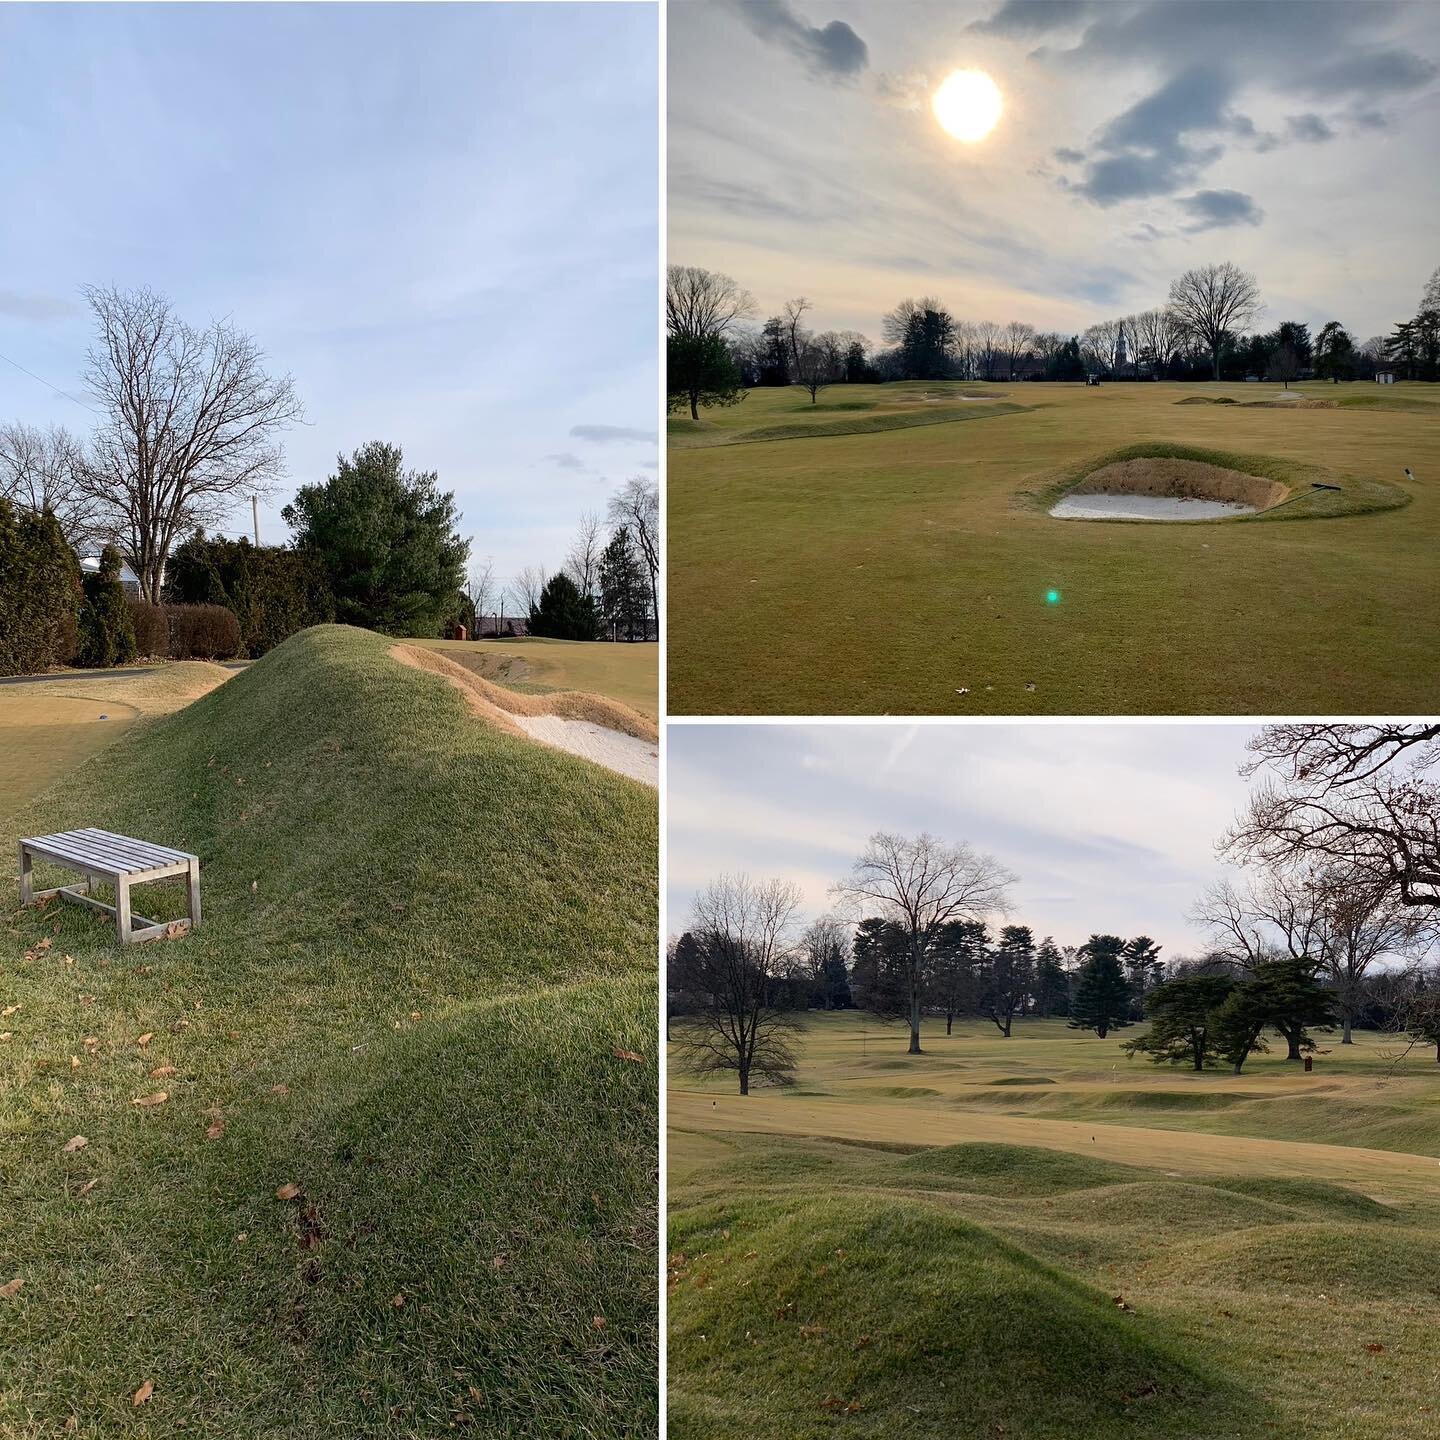 Finally got to see the second half of @bschneidergolf and @dundeegolf &lsquo;s super creative work at @llanerchcc. These above ground features inspired by early or pre-Golden Age work make for a distinguished landscape and golf experience. It&rsquo;s